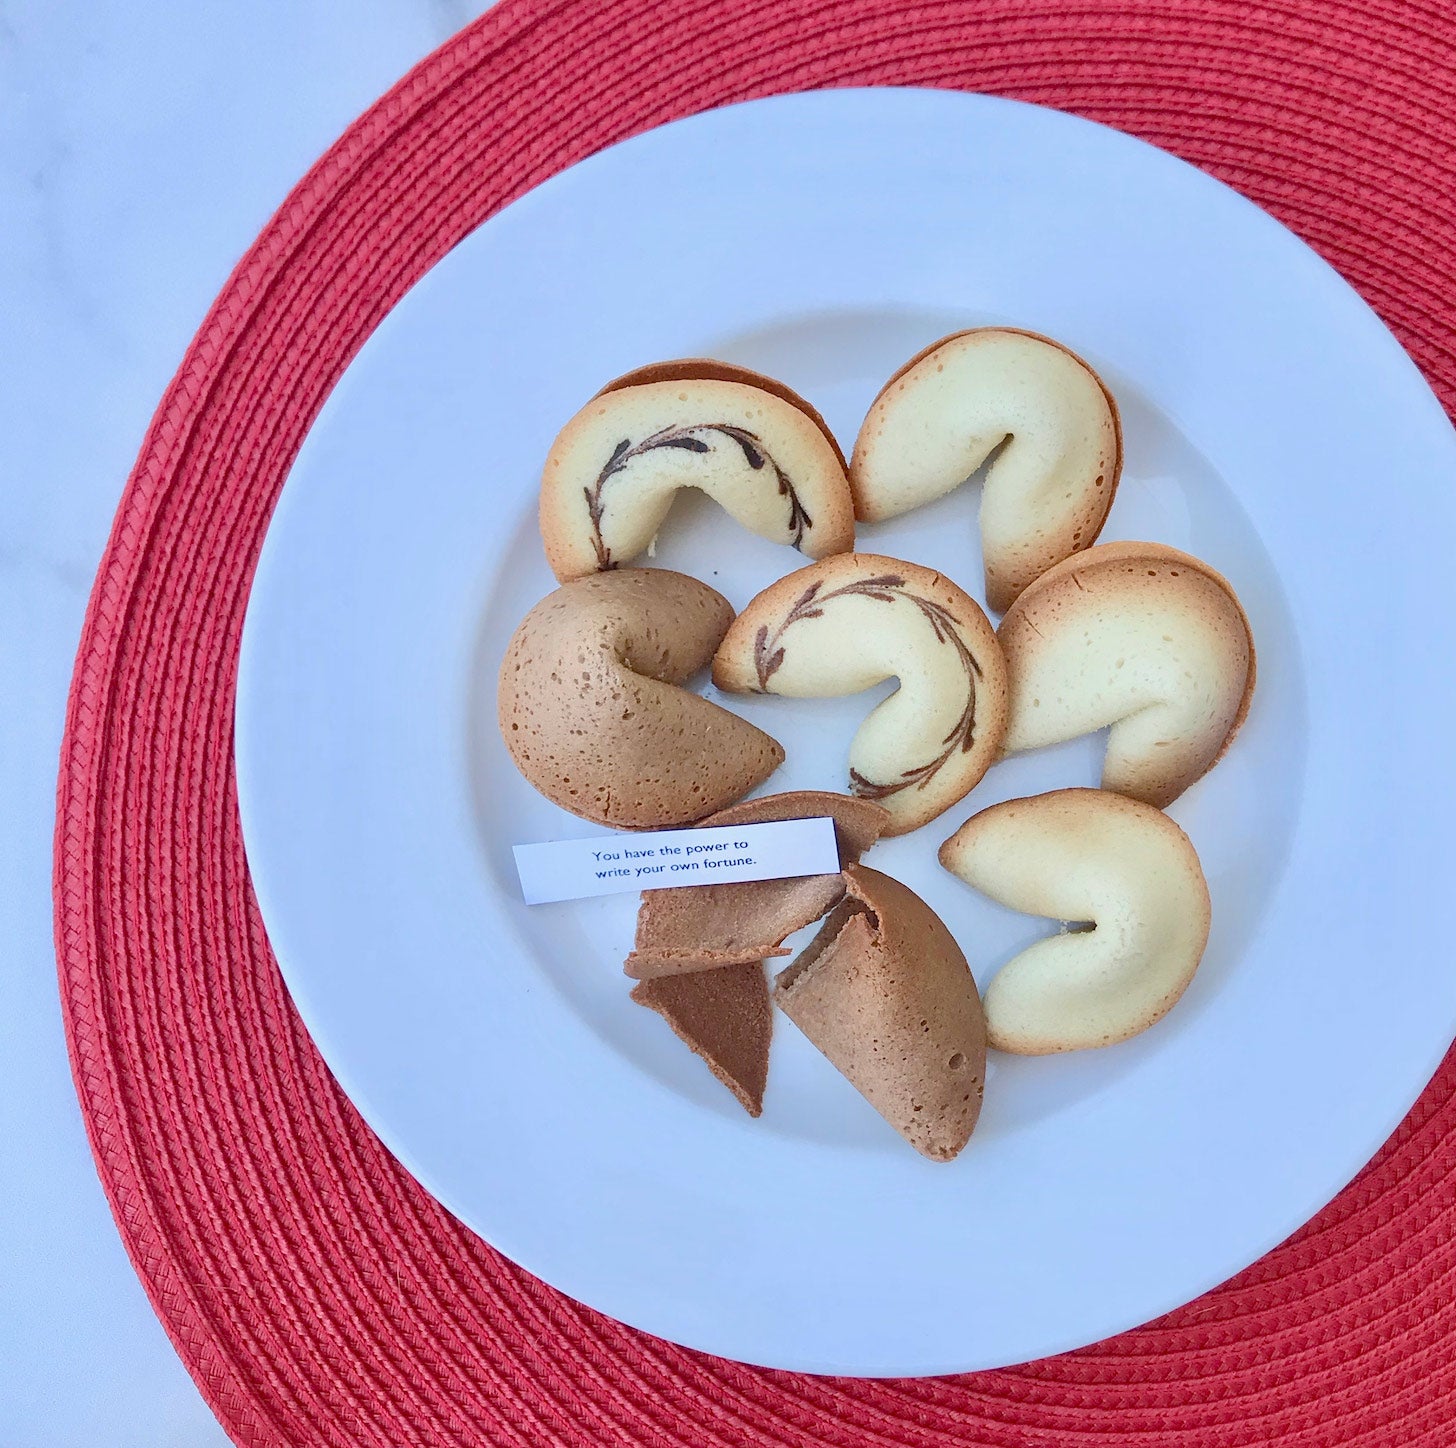 Make your own fortune cookies with this DIY Fortune Cookie Kit